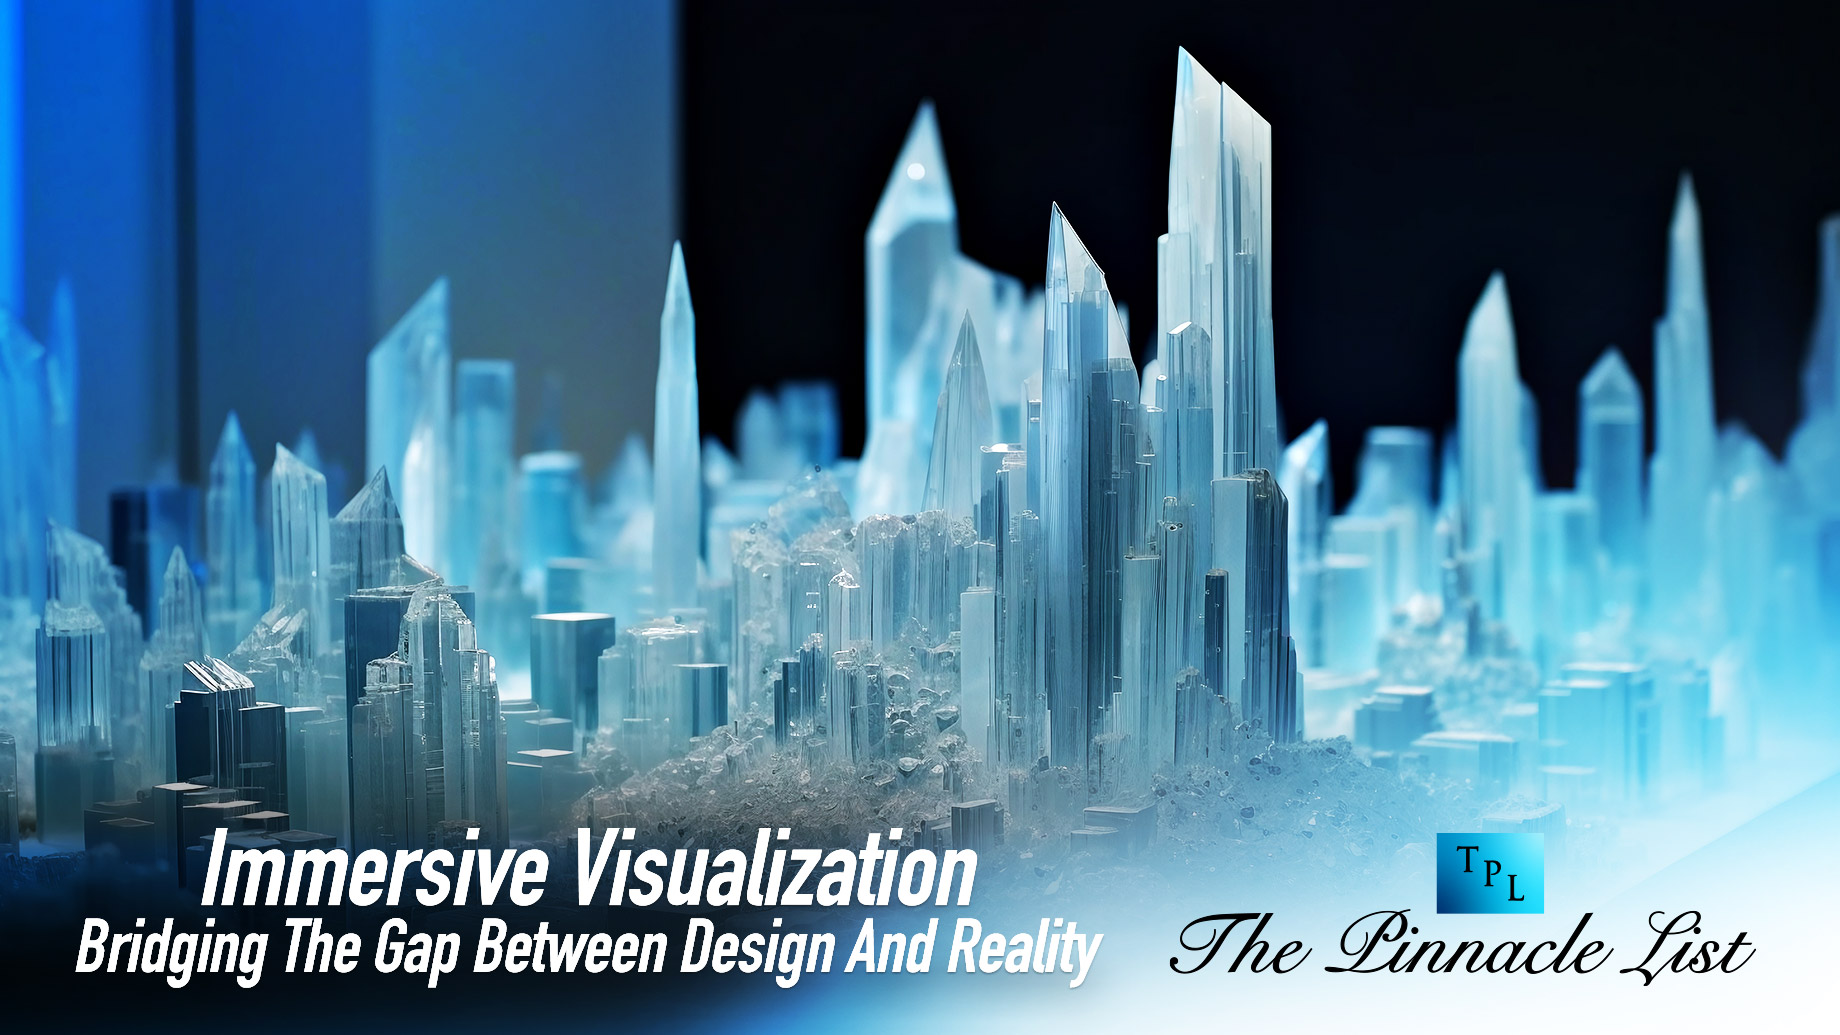 Immersive Visualization: Bridging The Gap Between Design And Reality